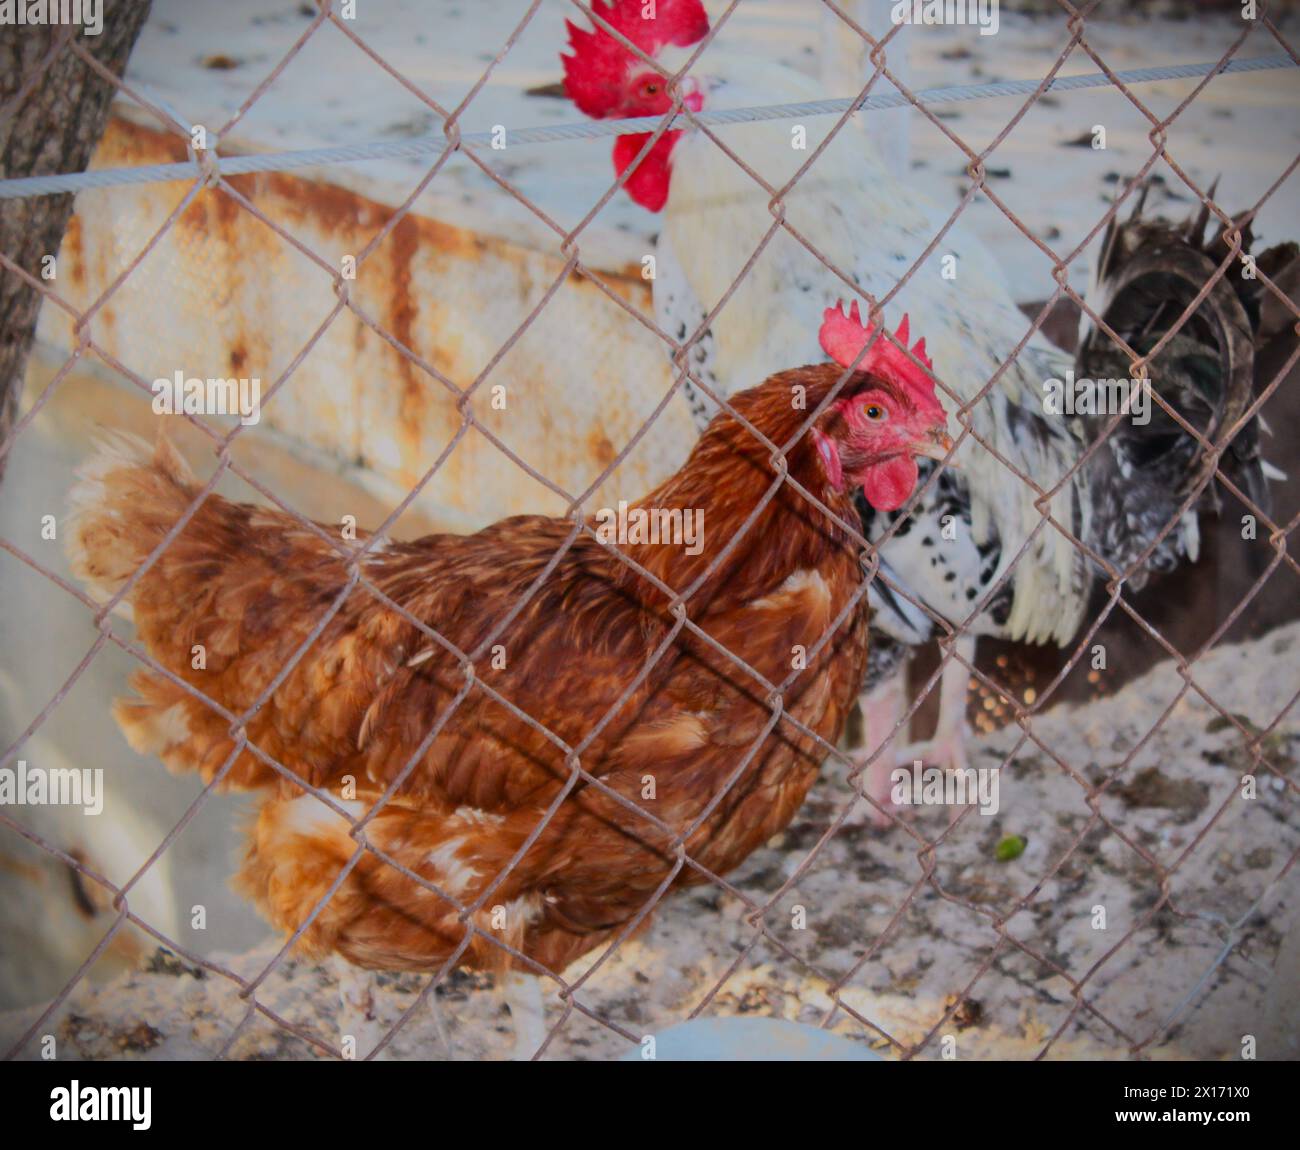 Village lifestyle, country house, chickens inside their coop. Ajloun, Jordan. Stock Photo